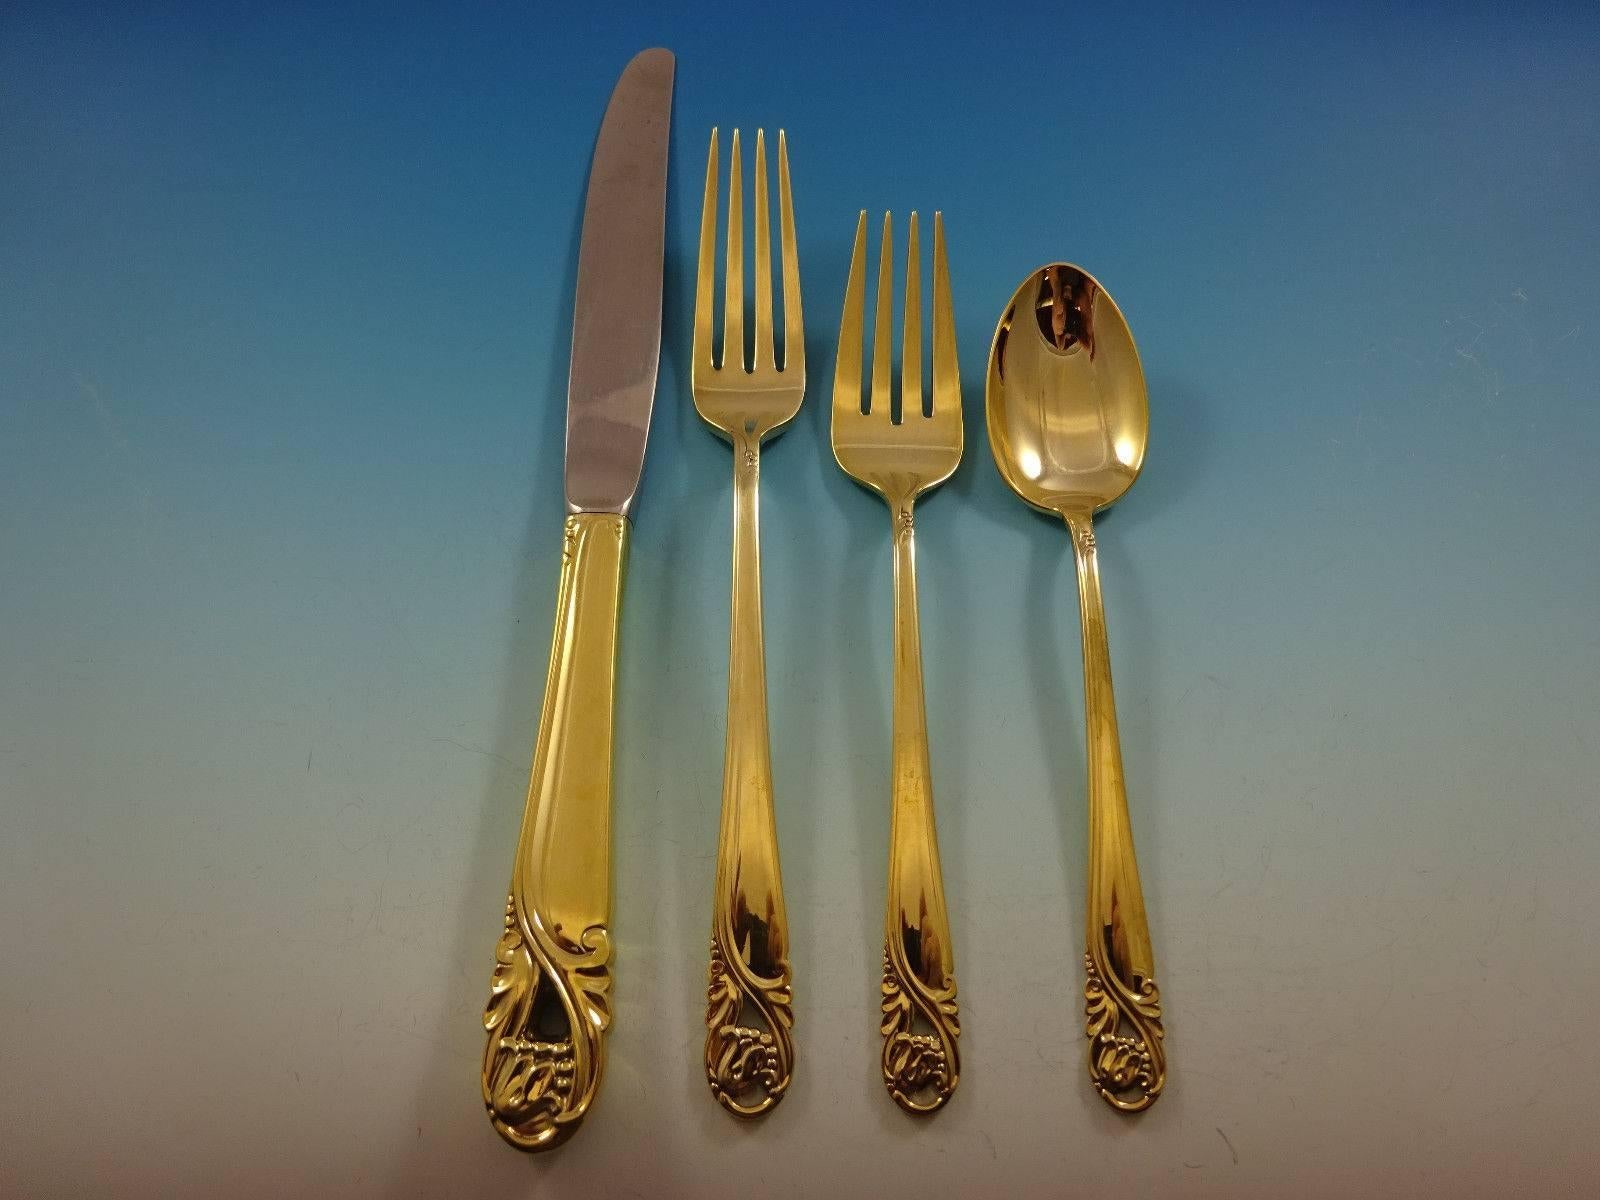 Gorgeous Spring Glory Gold by International sterling silver flatware set of 48 pieces. Gold flatware is on trend and makes a bold statement on your table. 

This set is vermeil (completely gold-washed) and includes:

12 knives, 9 1/4